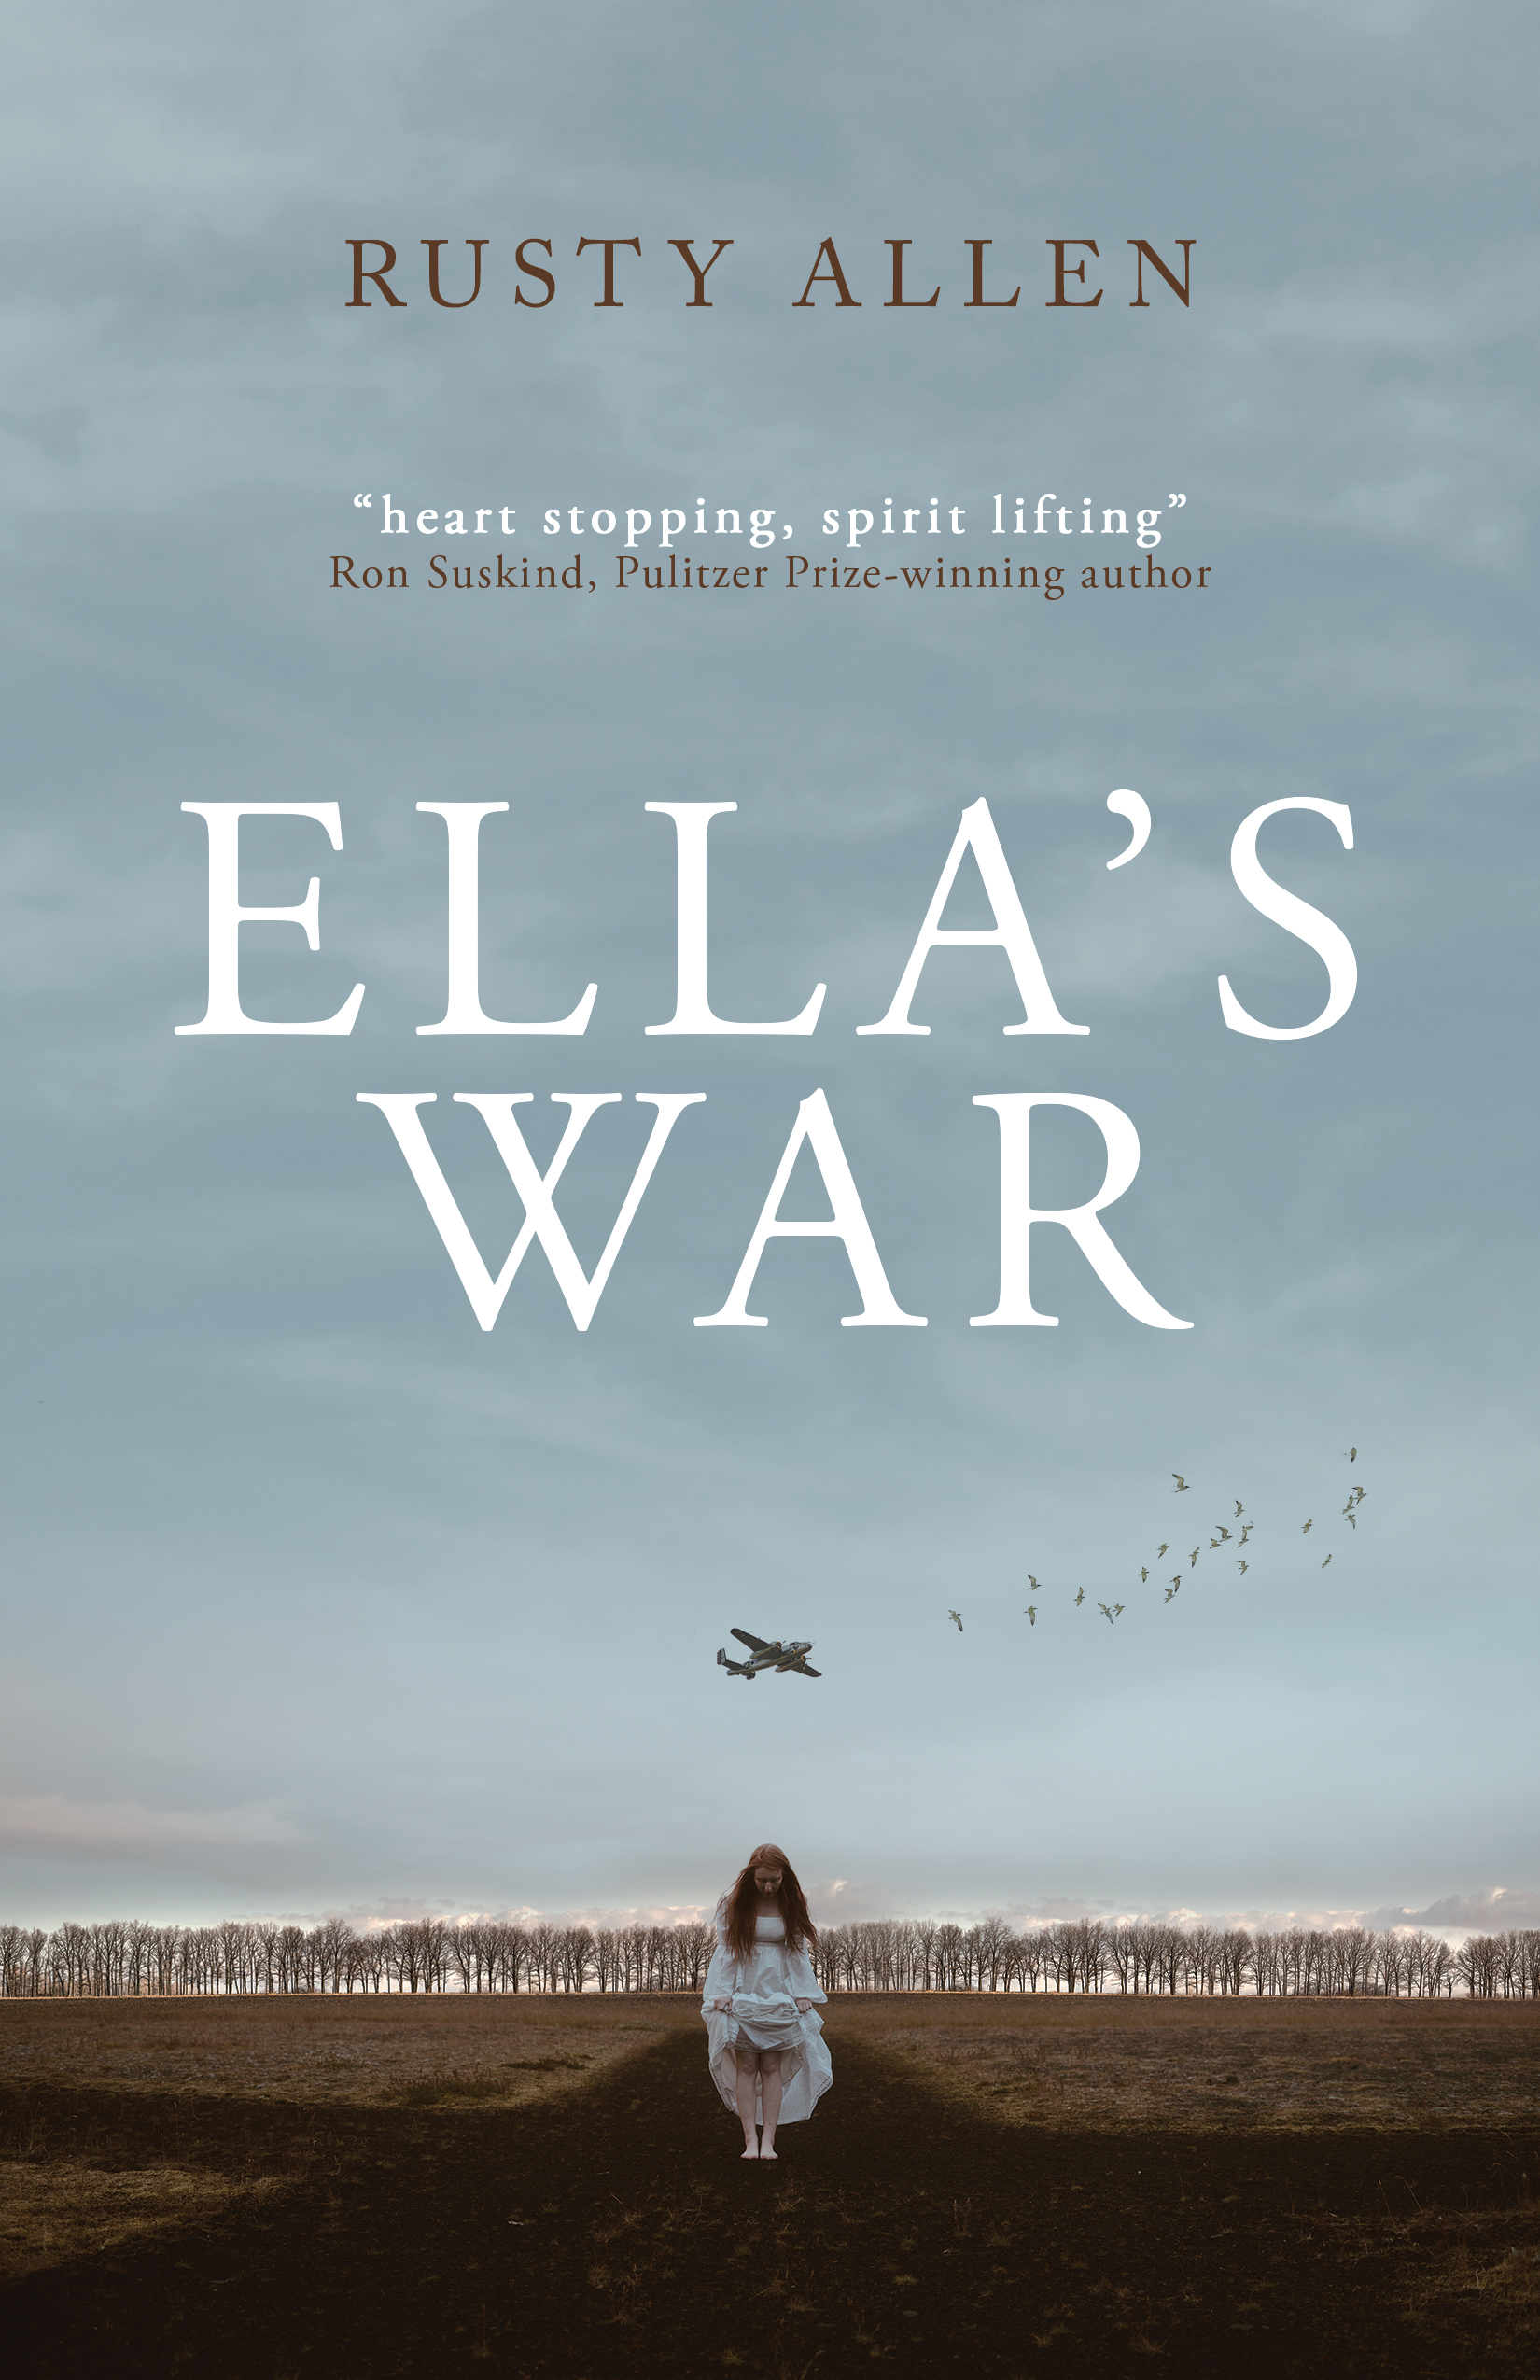 Cover of Ella's War, the debut novel by Rusty Allen